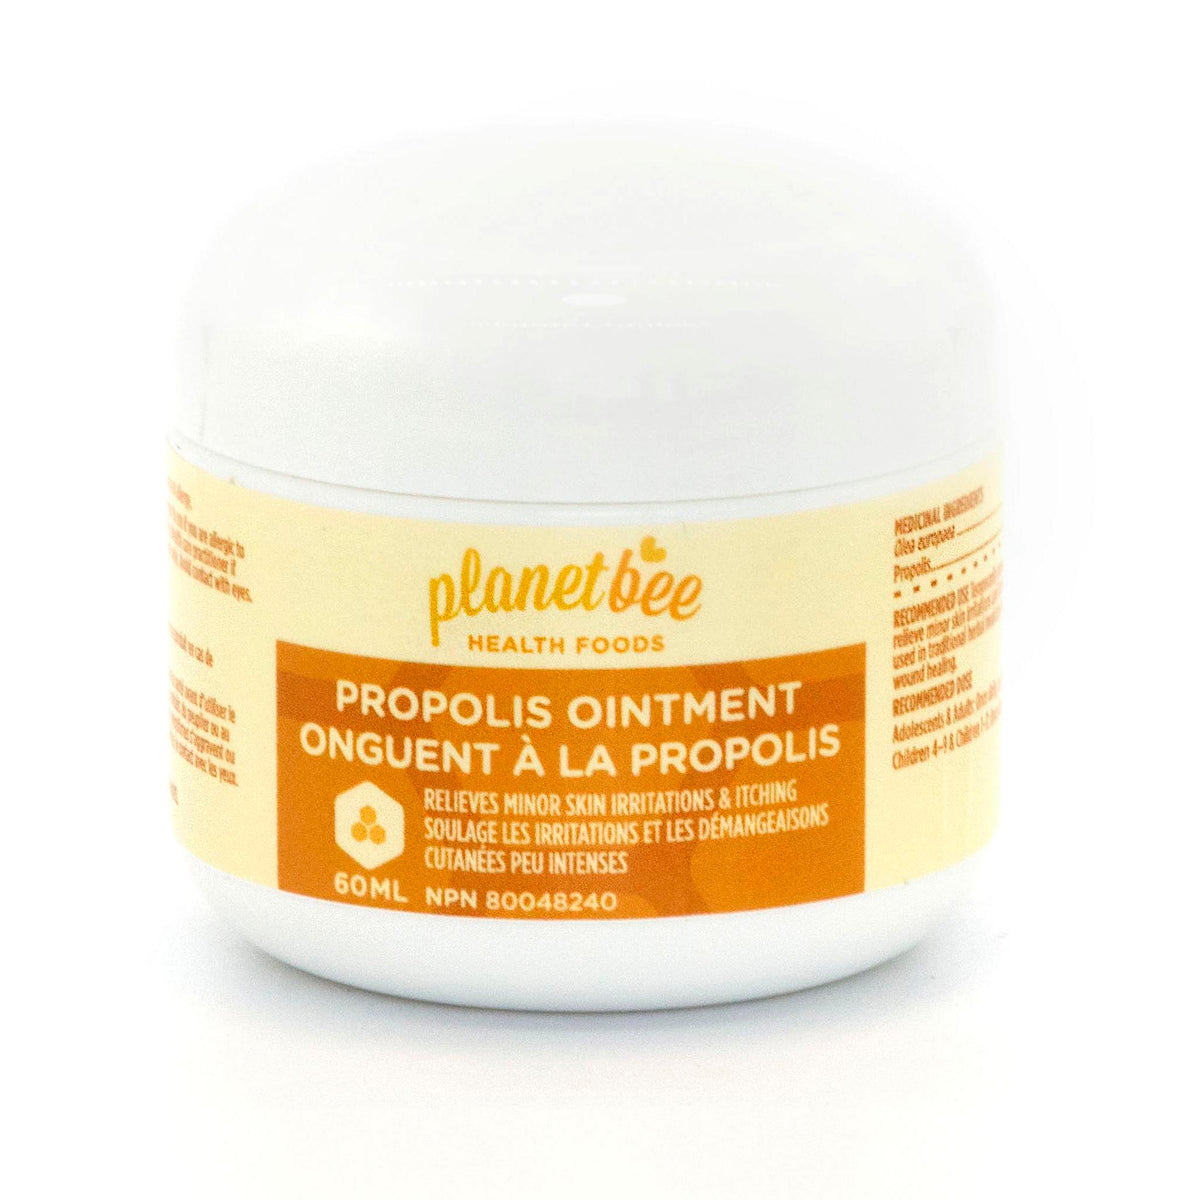 Planet Bee Propolis Ointment Creme Cream